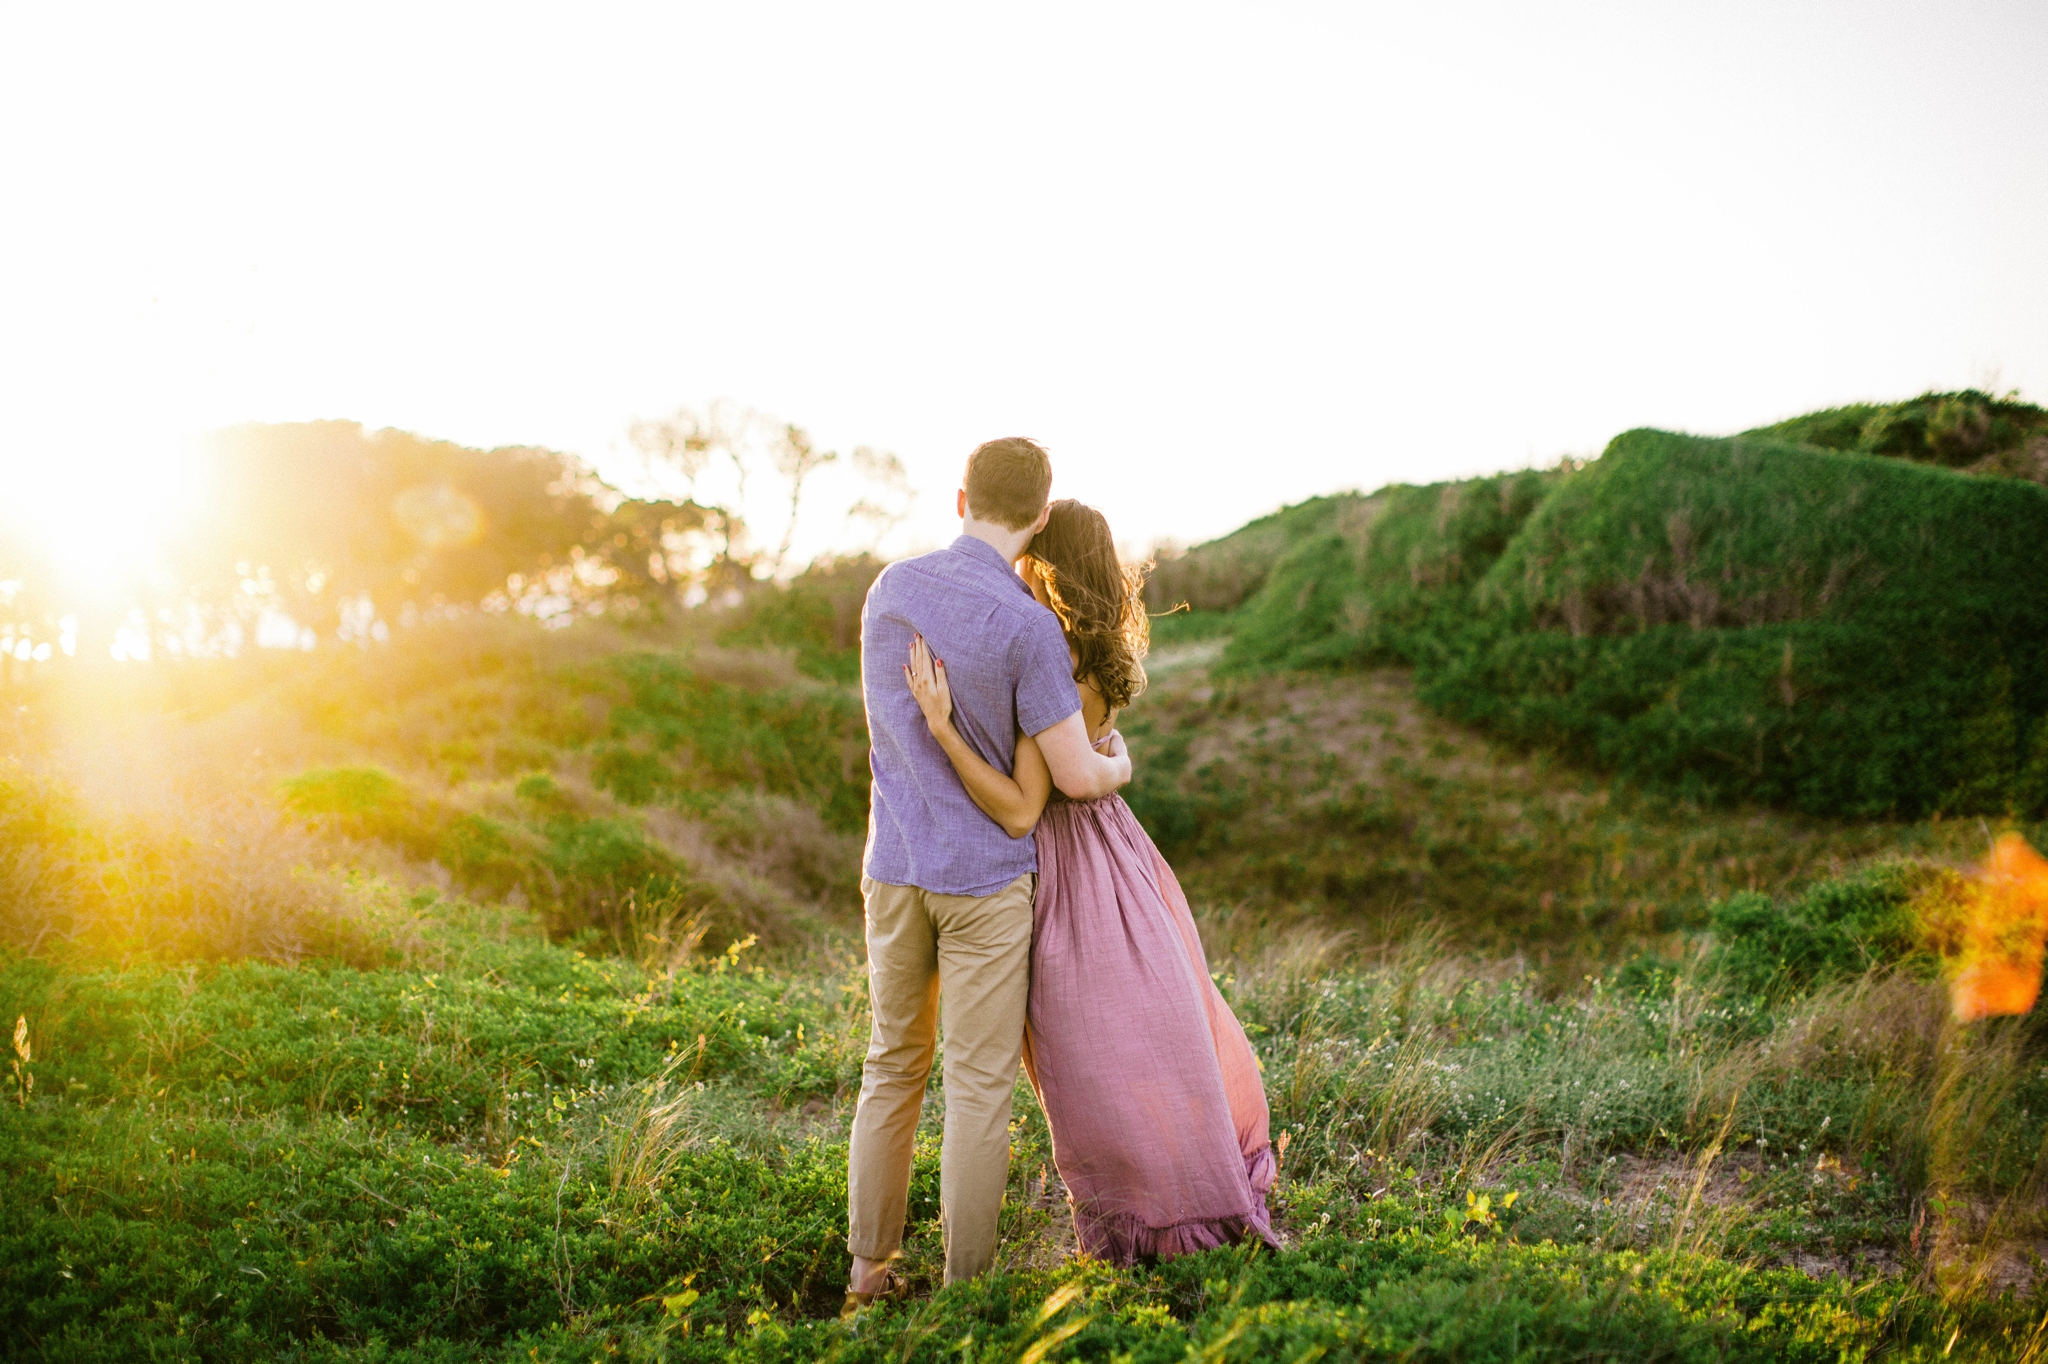  couple looking at the sunset  - in front of lush green dunes and hills with the sunset behind them - Woman is in a flowy pastel maxi dress - candid and unposed outdoor golden light session - engagement photographer in honolulu, oahu, hawaii - johann